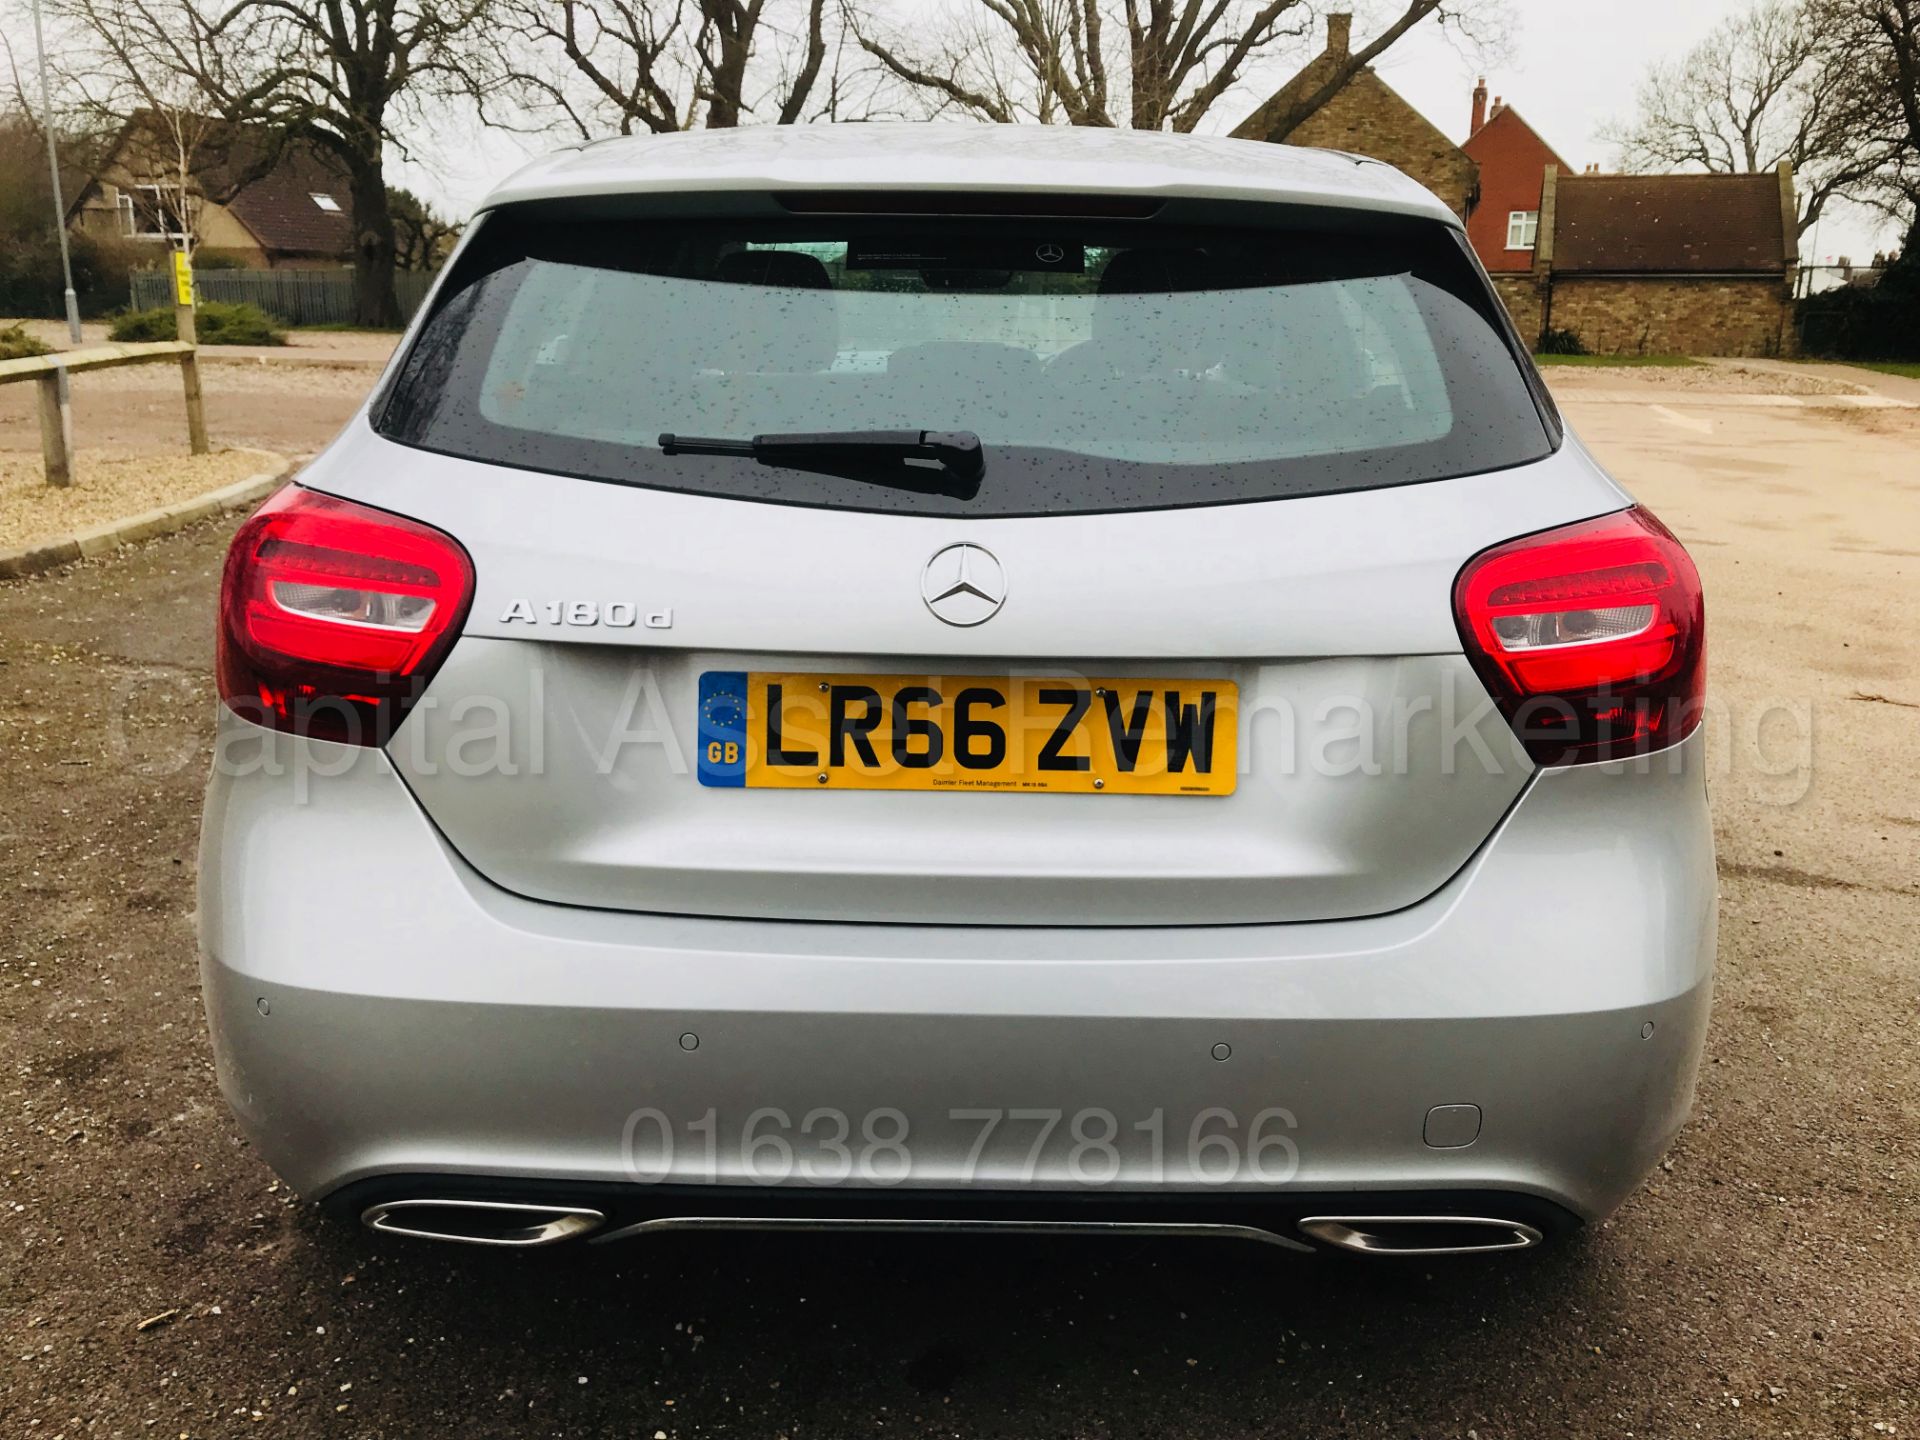 MERCEDES-BENZ A180D 'SPORT' (2017 MODEL) '7G TRONIC AUTO - LEATHER - SAT NAV' (1 OWNER FROM NEW) - Image 10 of 41